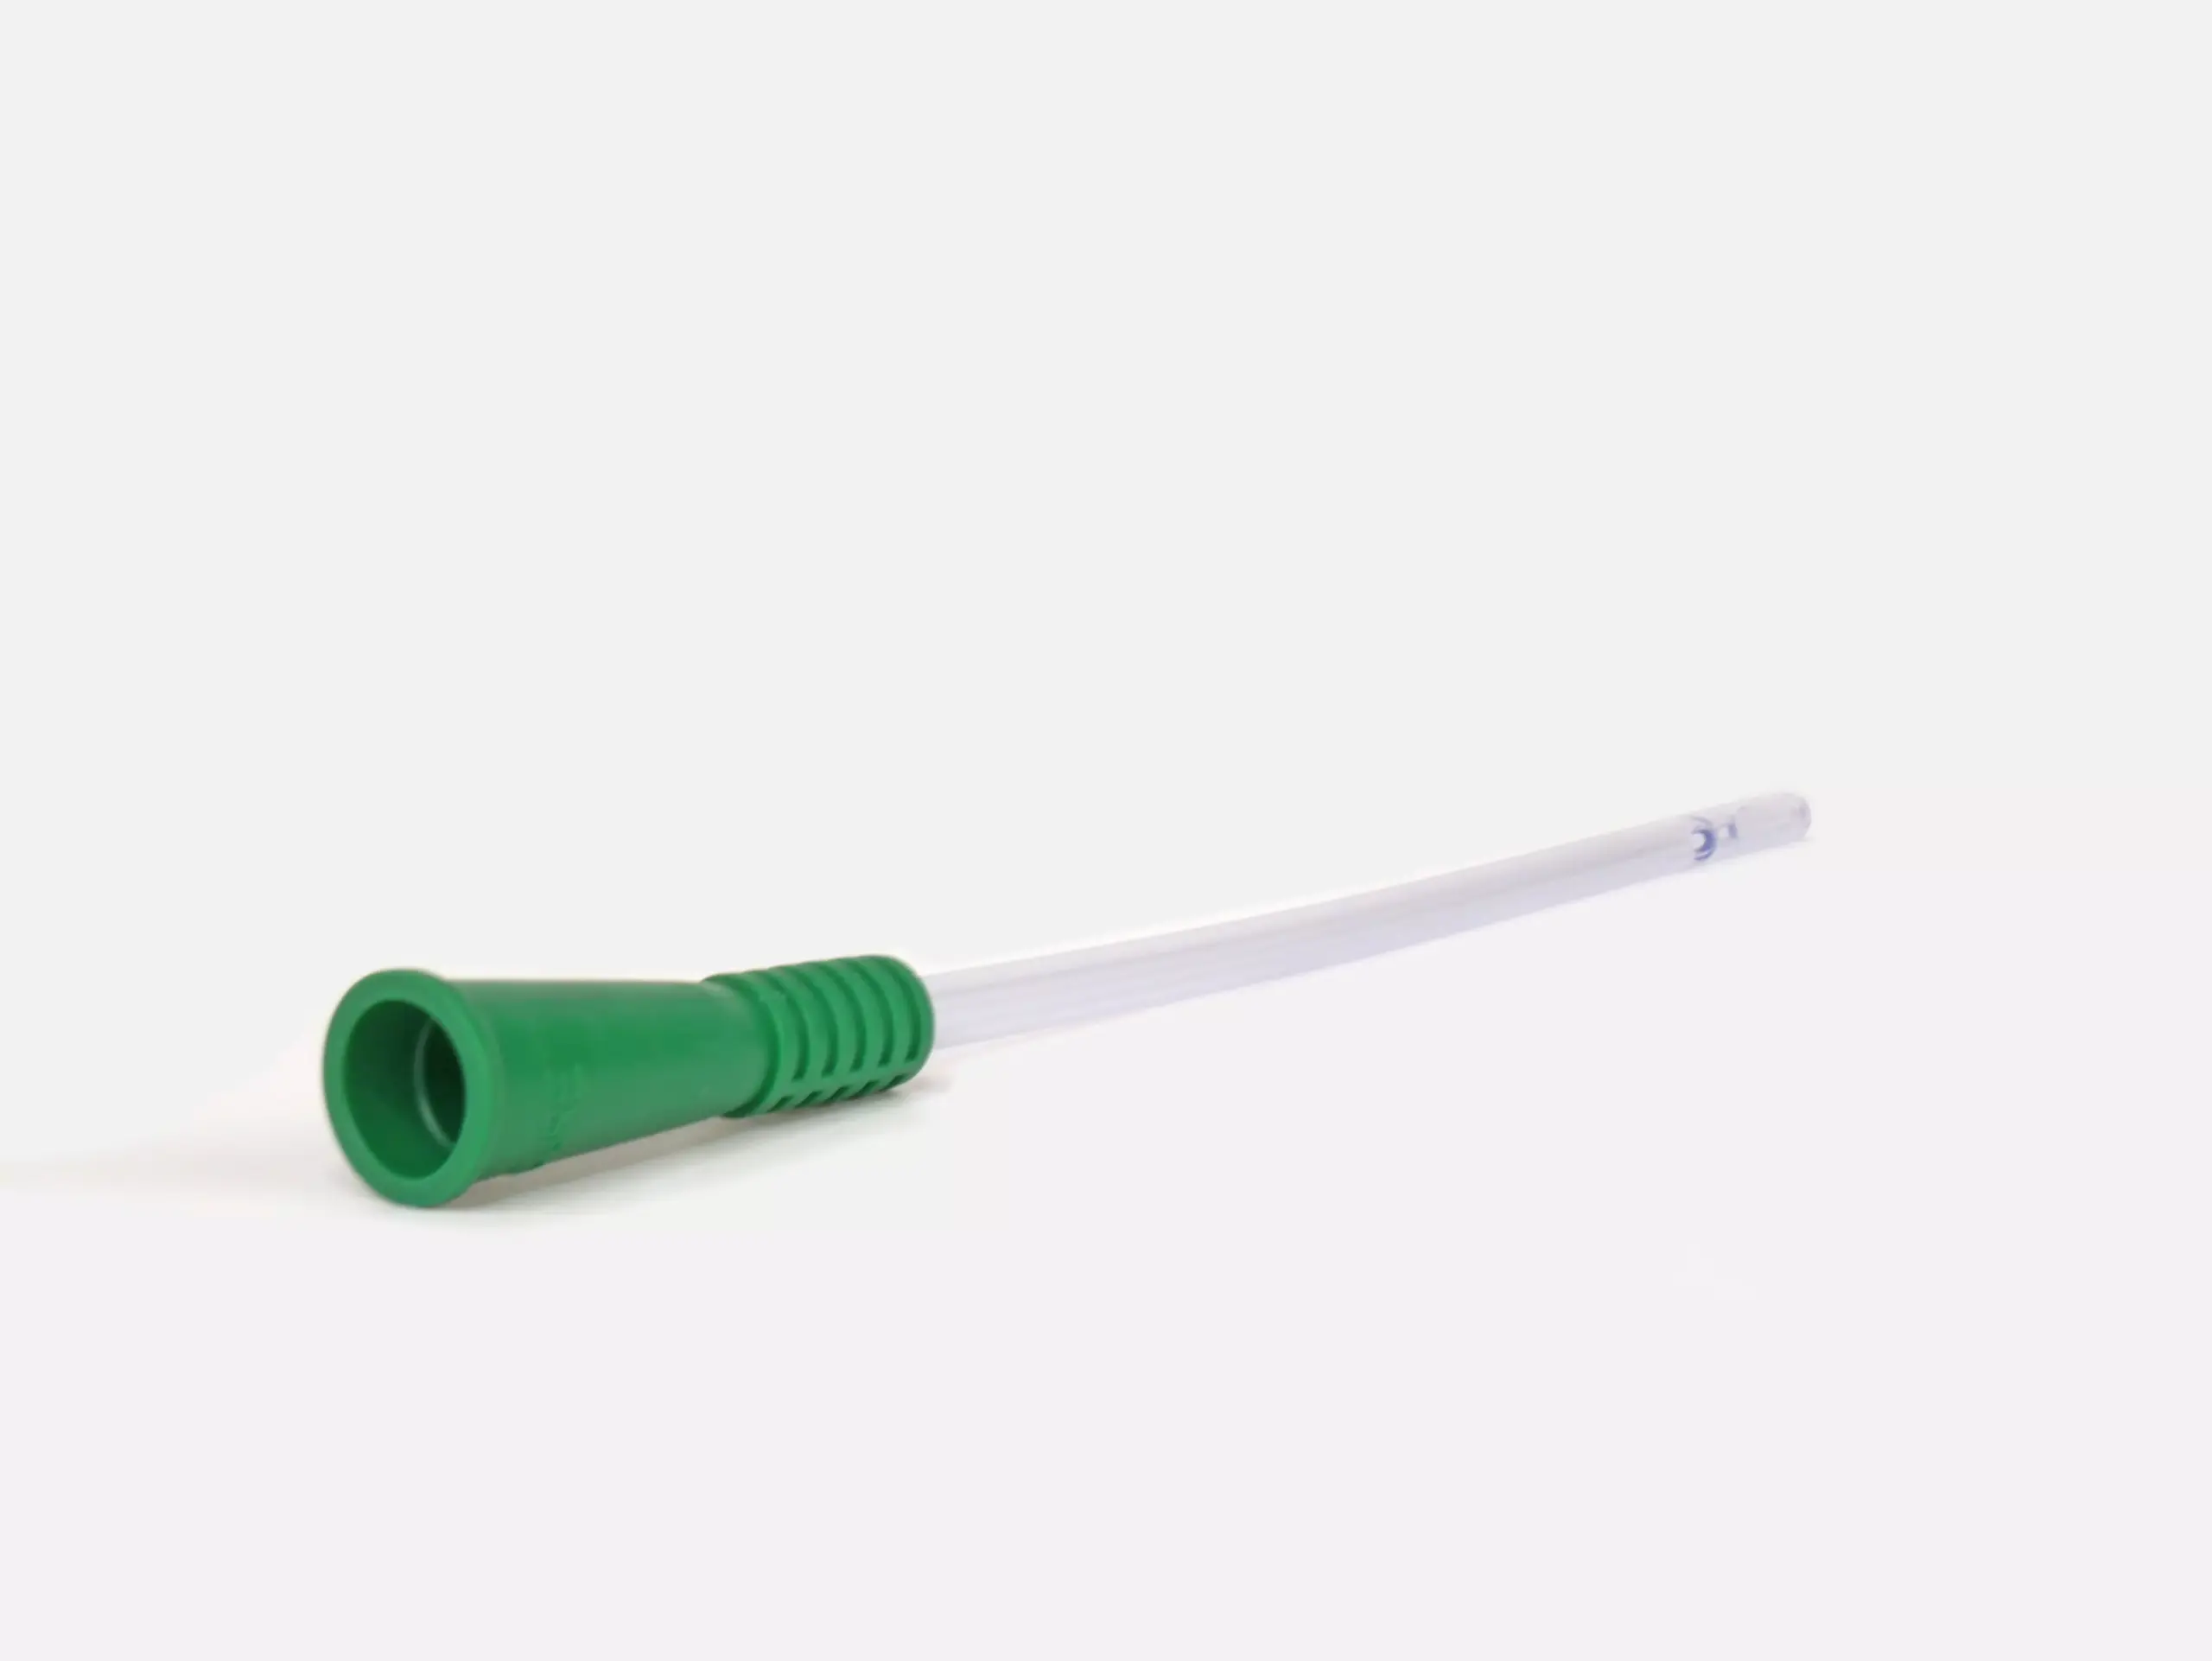 Close-up product image photograph of one of the RA Fischer Co.'s catheters available for urological care. Cure brand. Focus of the image is the green gripper sleeve